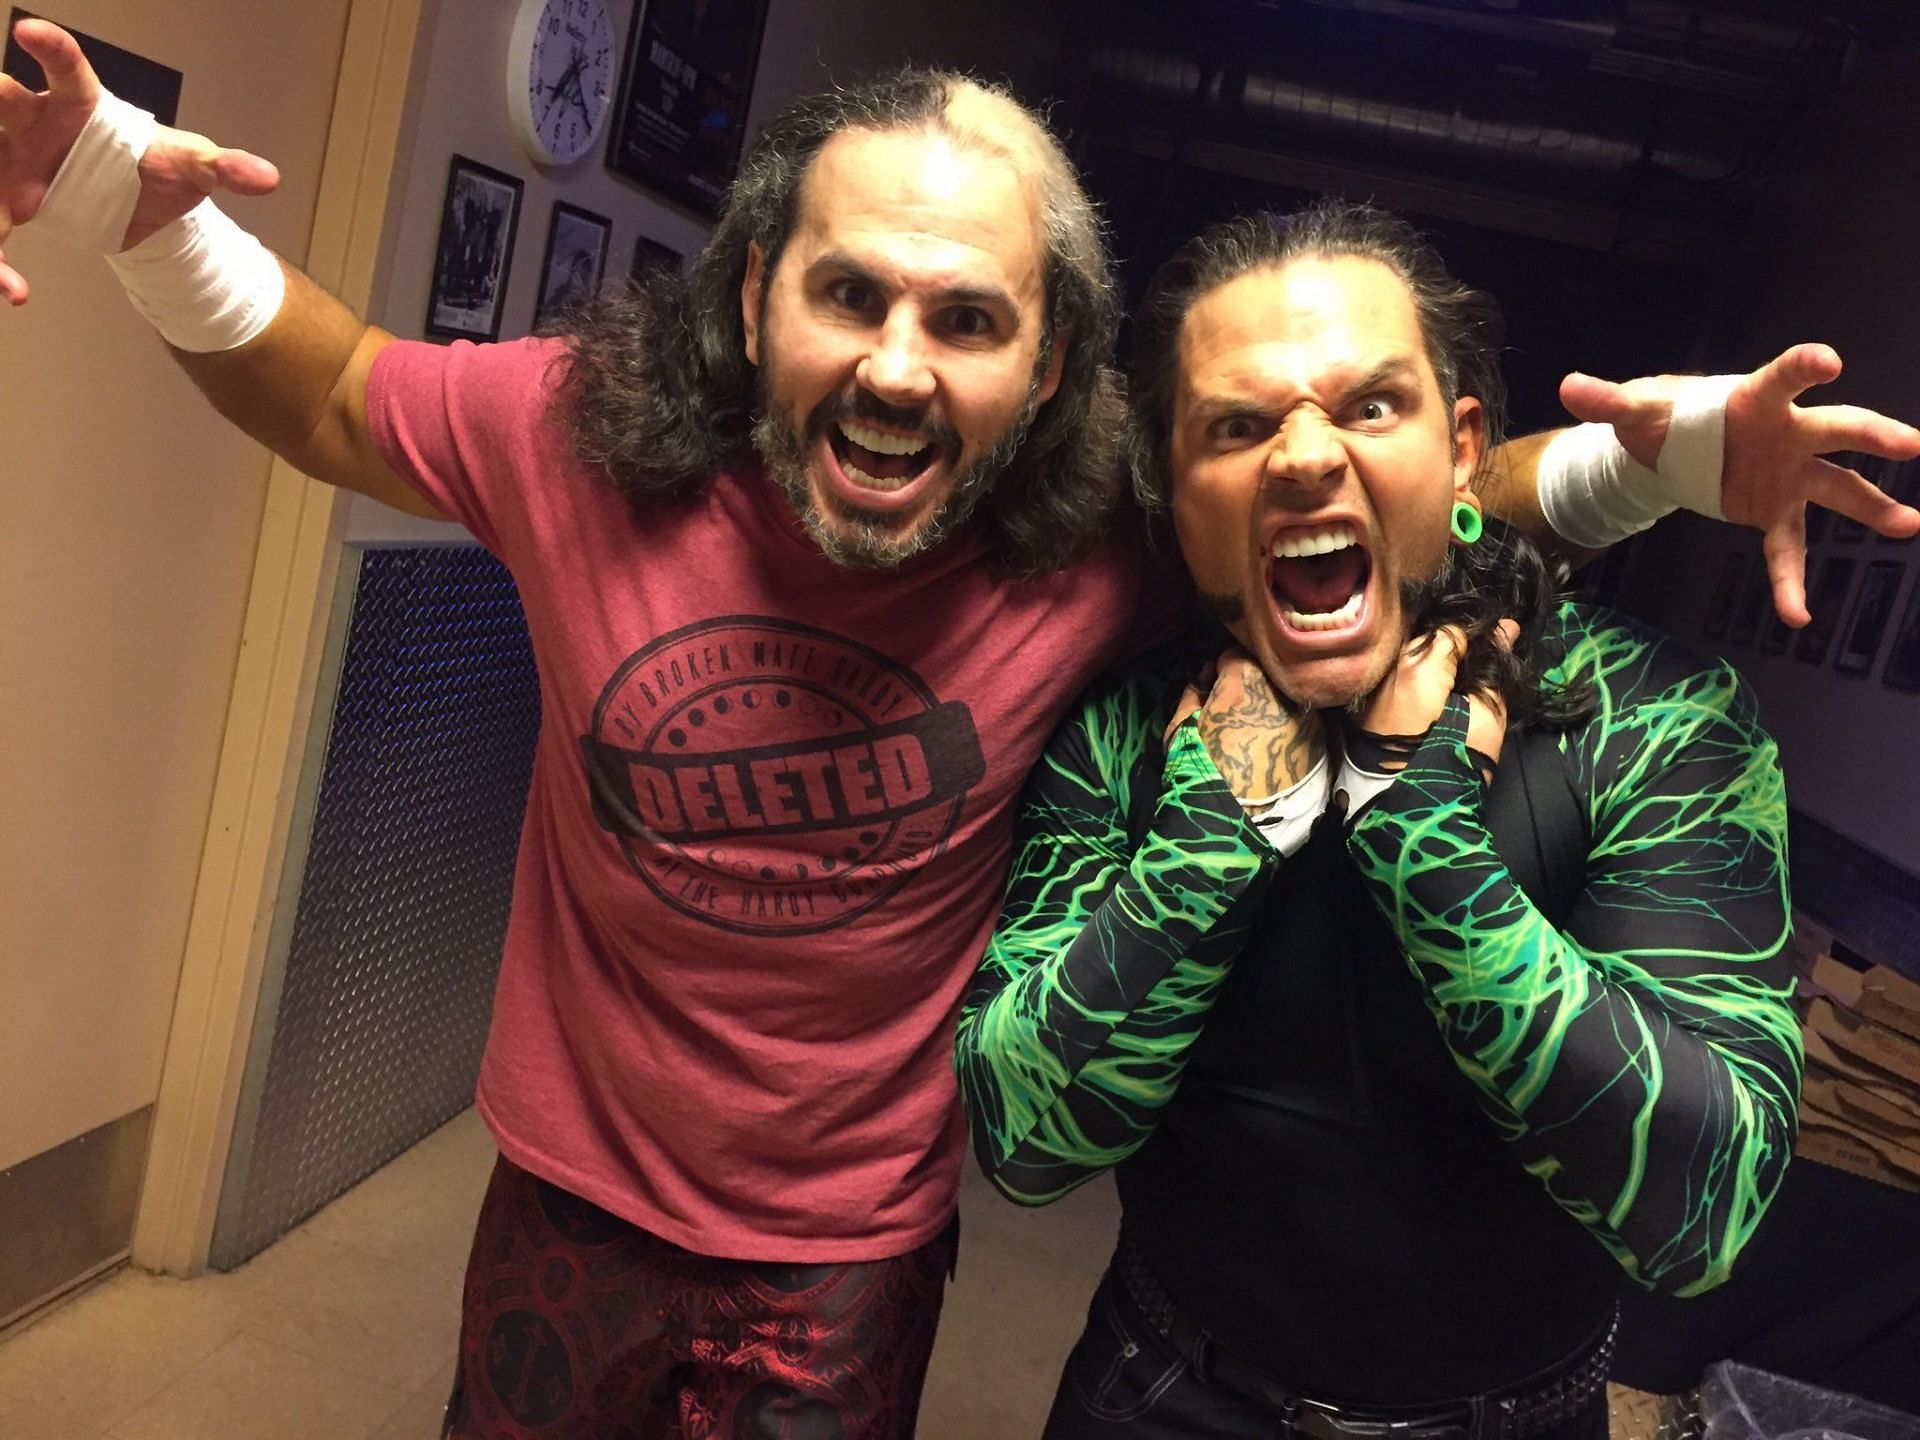 Matt and Jeff Hardy have reunited once again.